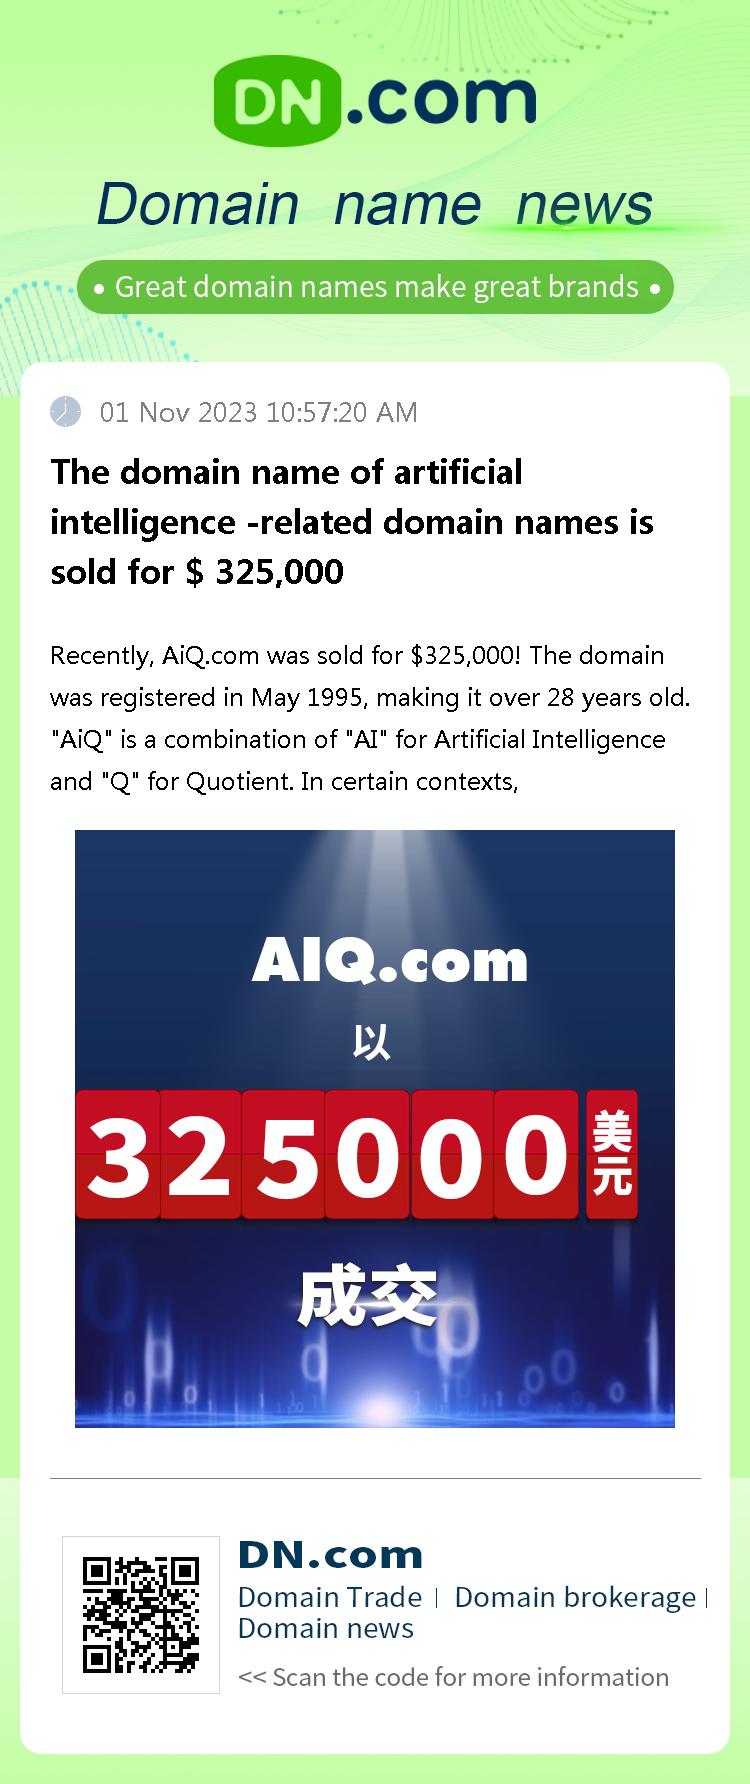 The domain name of artificial intelligence -related domain names is sold for $ 325,000